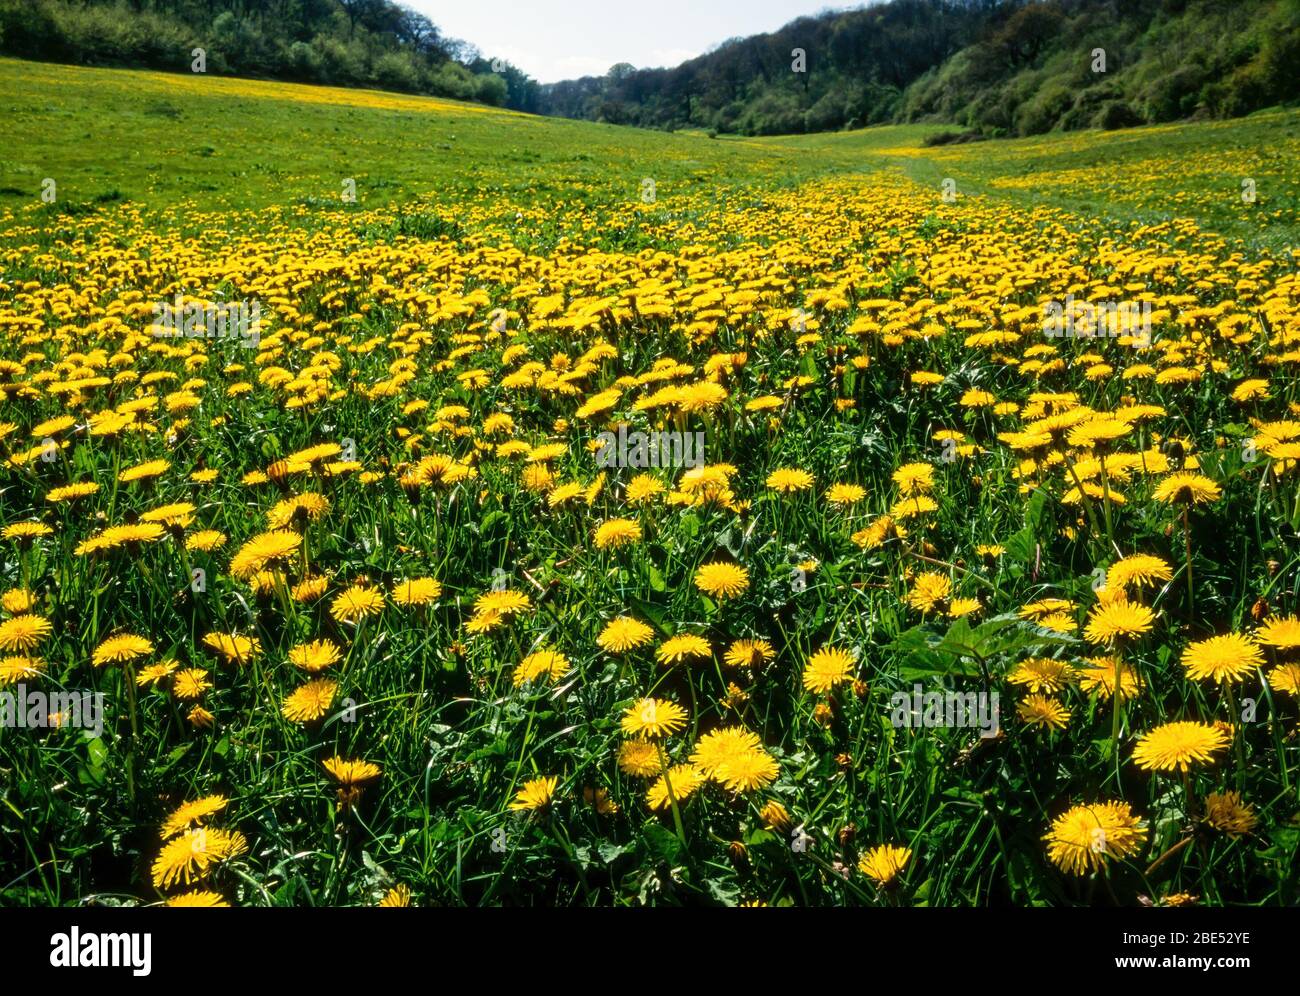 Green grassy meadow field covered in bright yellow dandelion flowers (Taraxacum officinale) in spring, Gloucestershire, England, UK Stock Photo